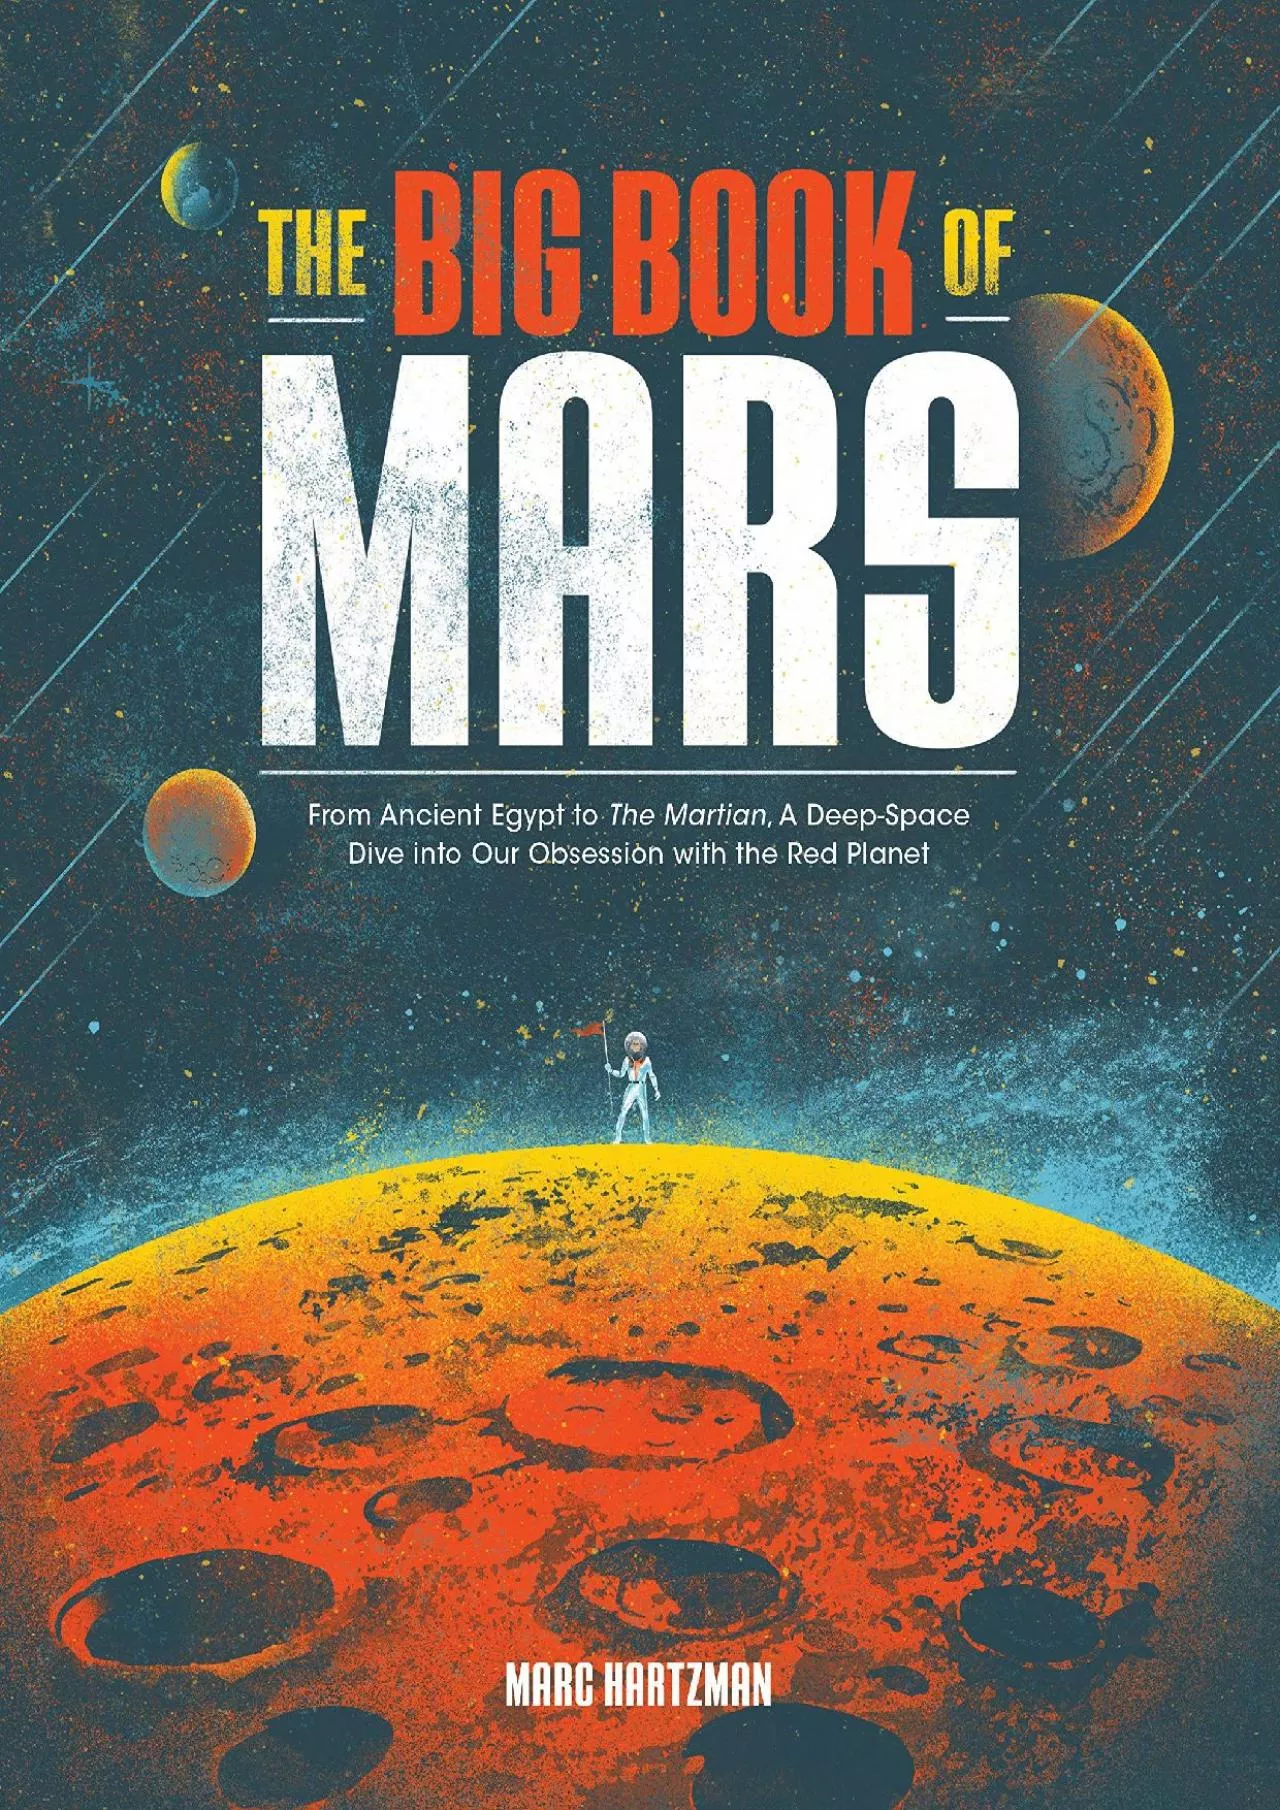 (EBOOK)-The Big Book of Mars: From Ancient Egypt to The Martian, A Deep-Space Dive into